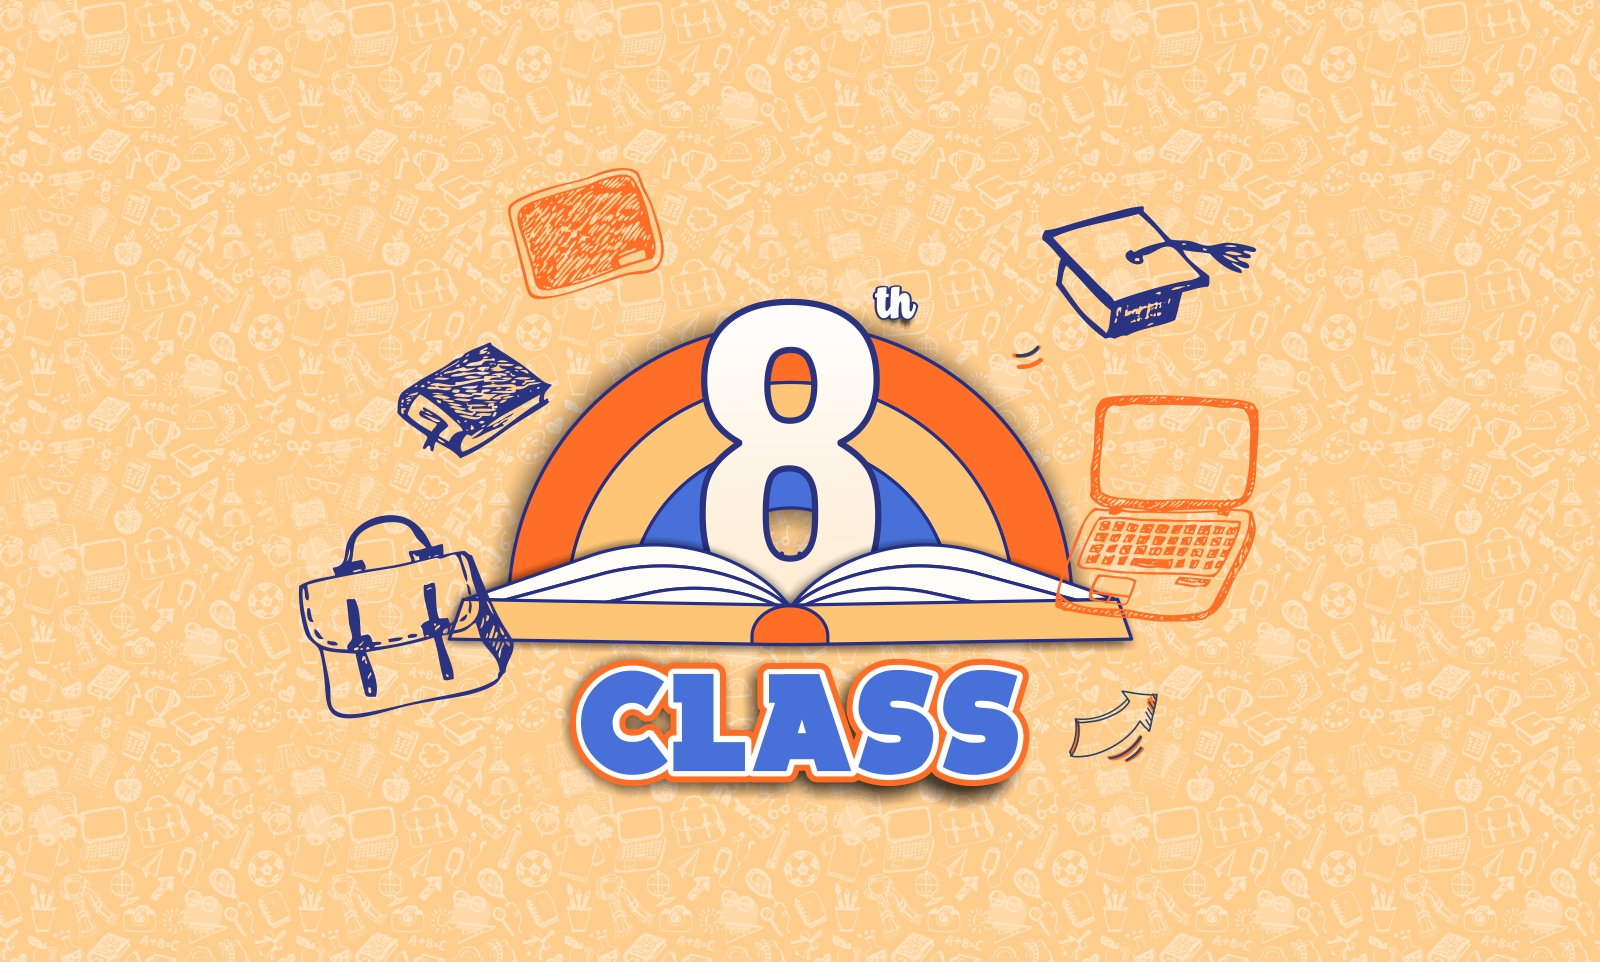 RS Aggarwal Maths Class 8 - APK Download for Android | Aptoide